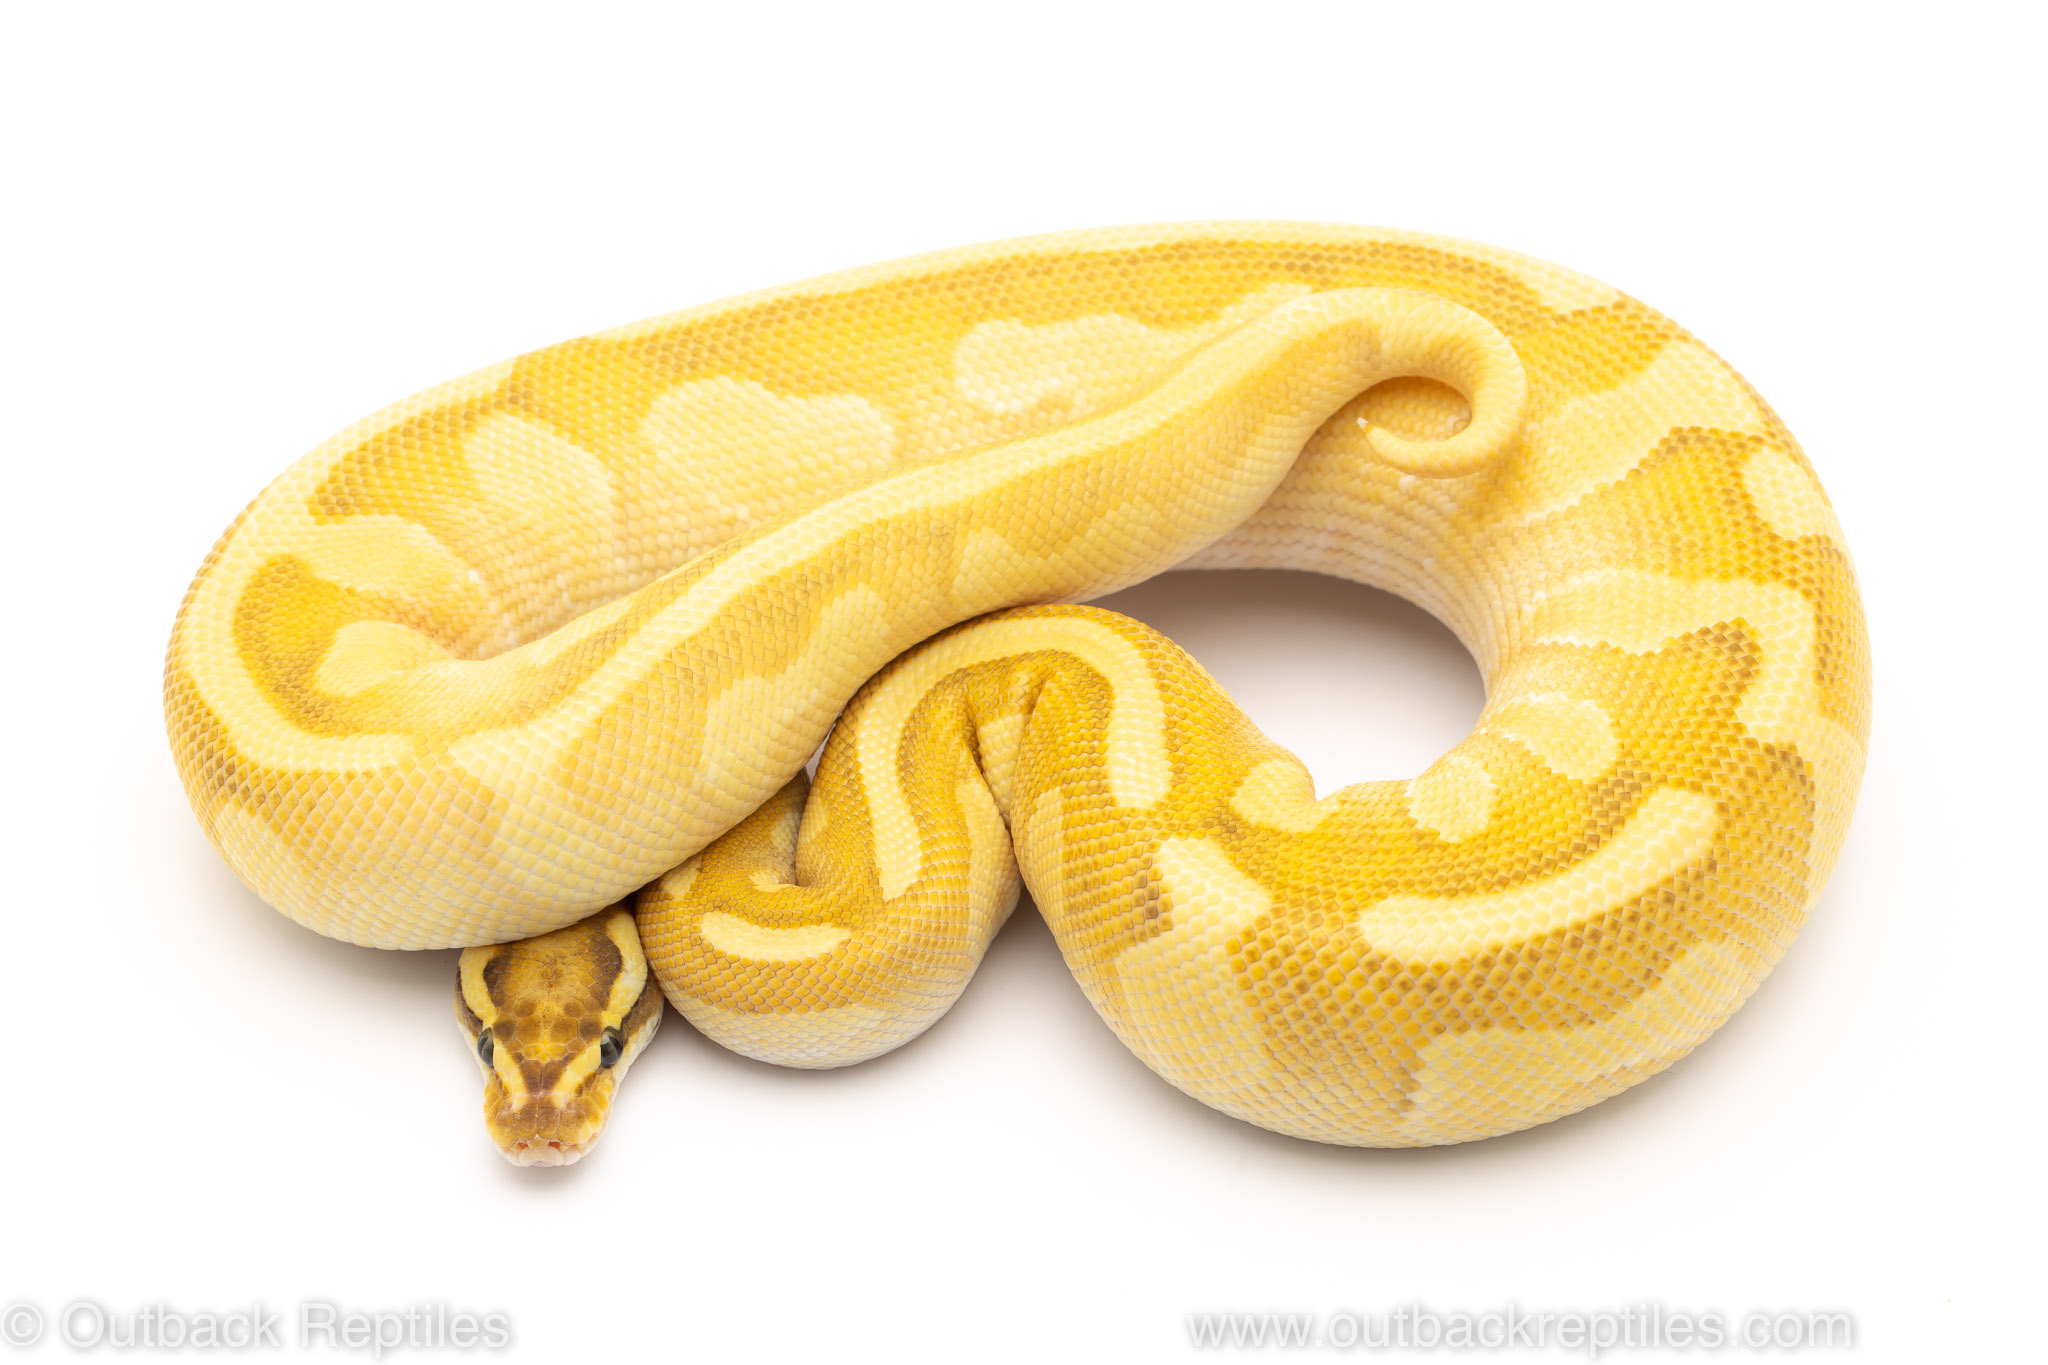 Fire lesser enchi yellowbelly ball python for sale